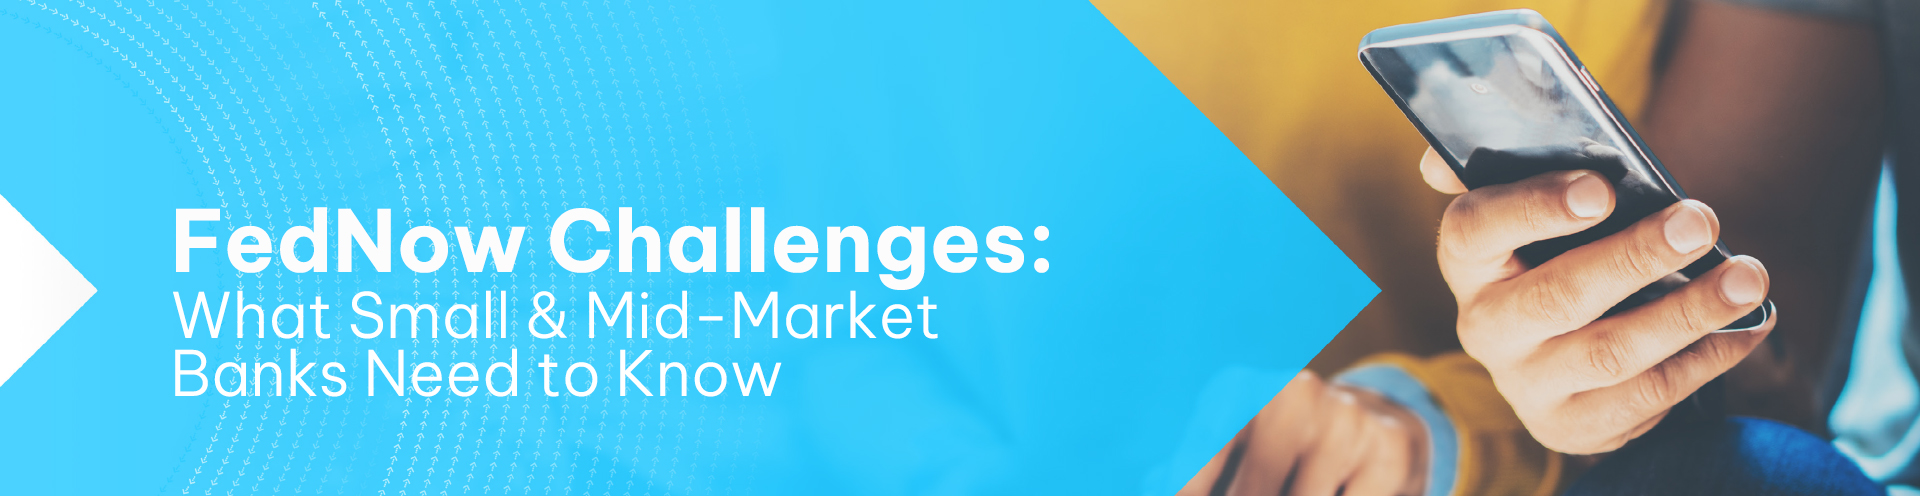 FedNow Challenges: What midmarket and small banks need to know